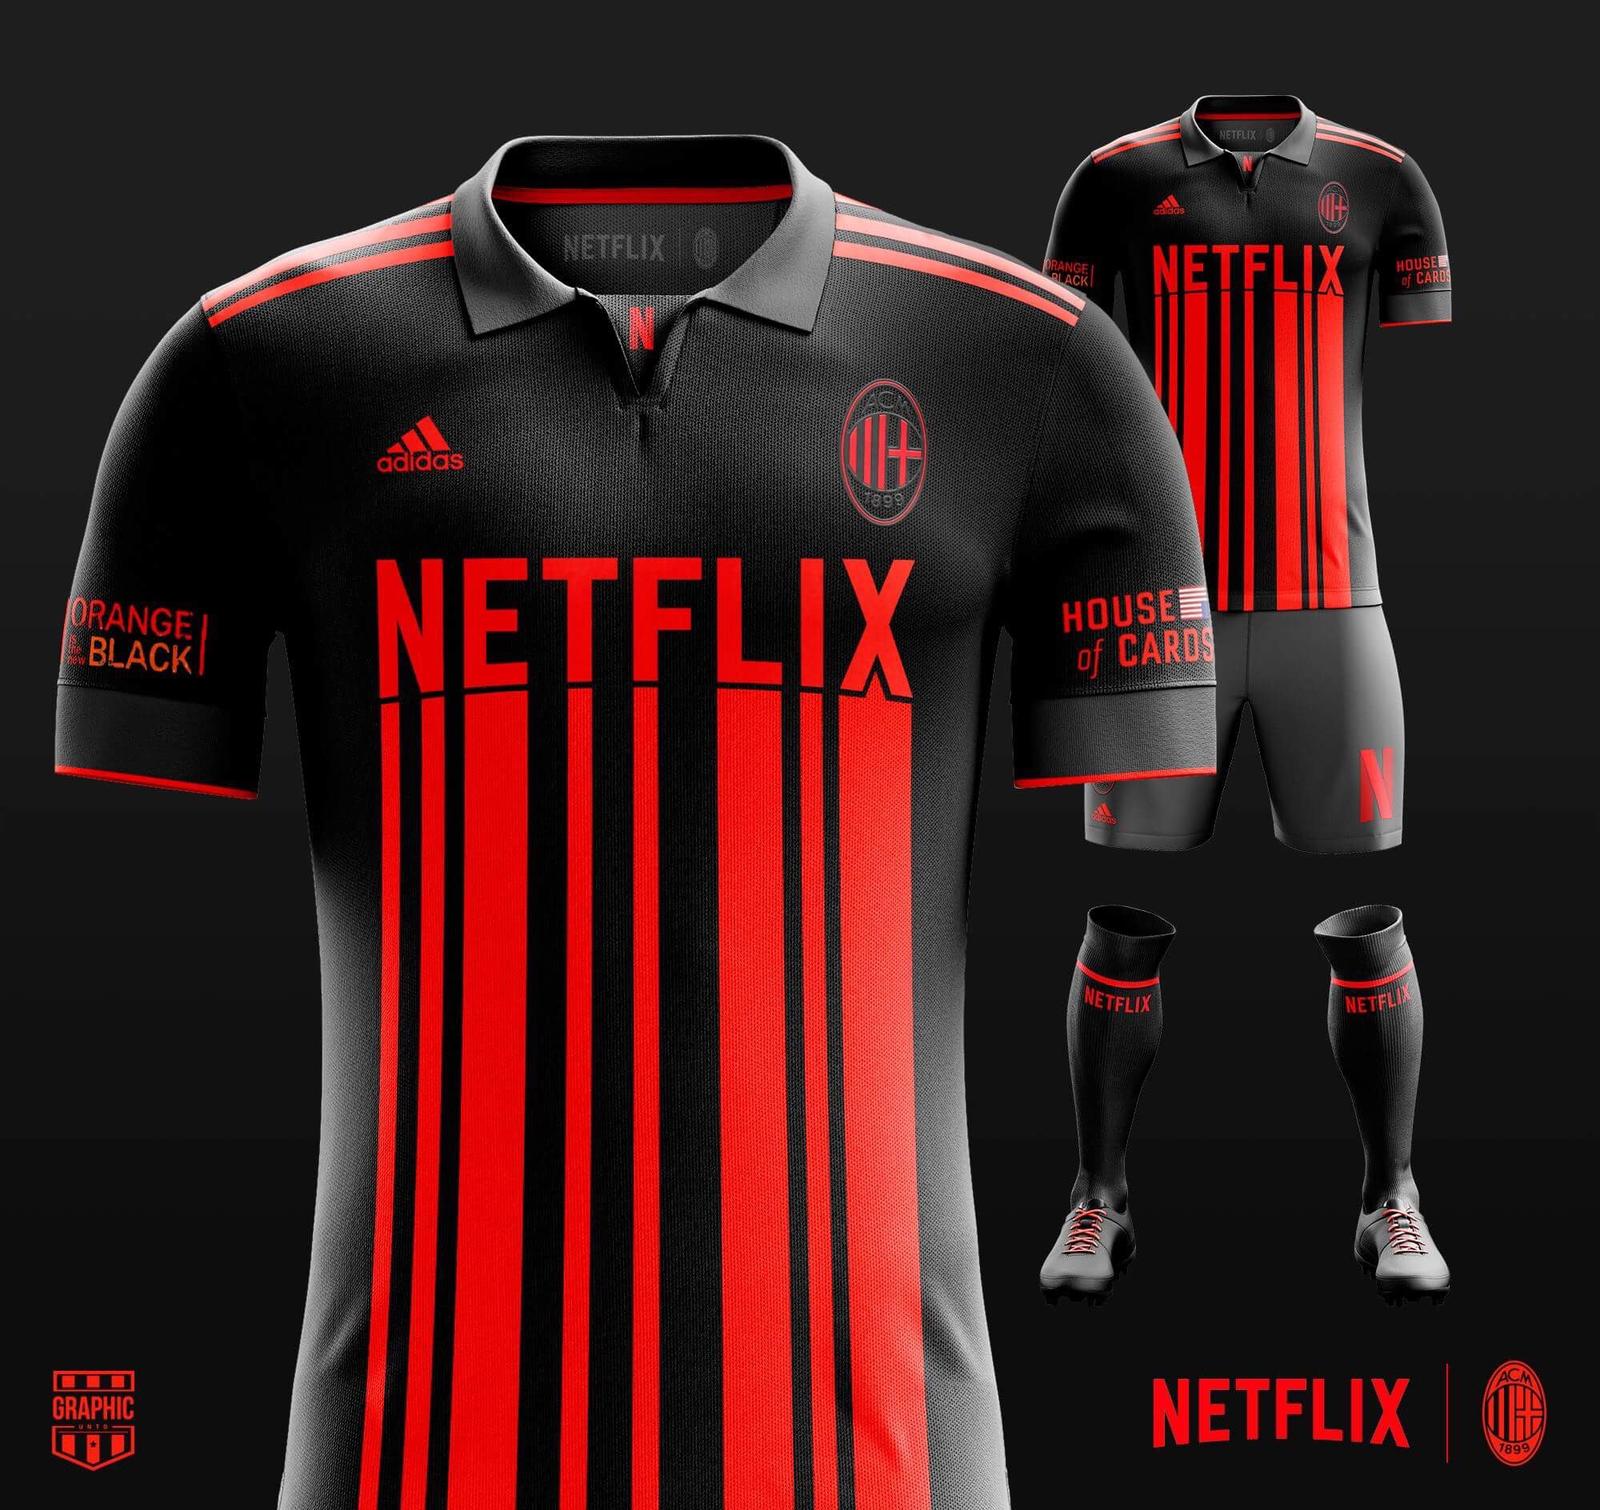 More Insane Sponsor Football Kit Concepts by Graphic UNTD - Footy Headlines